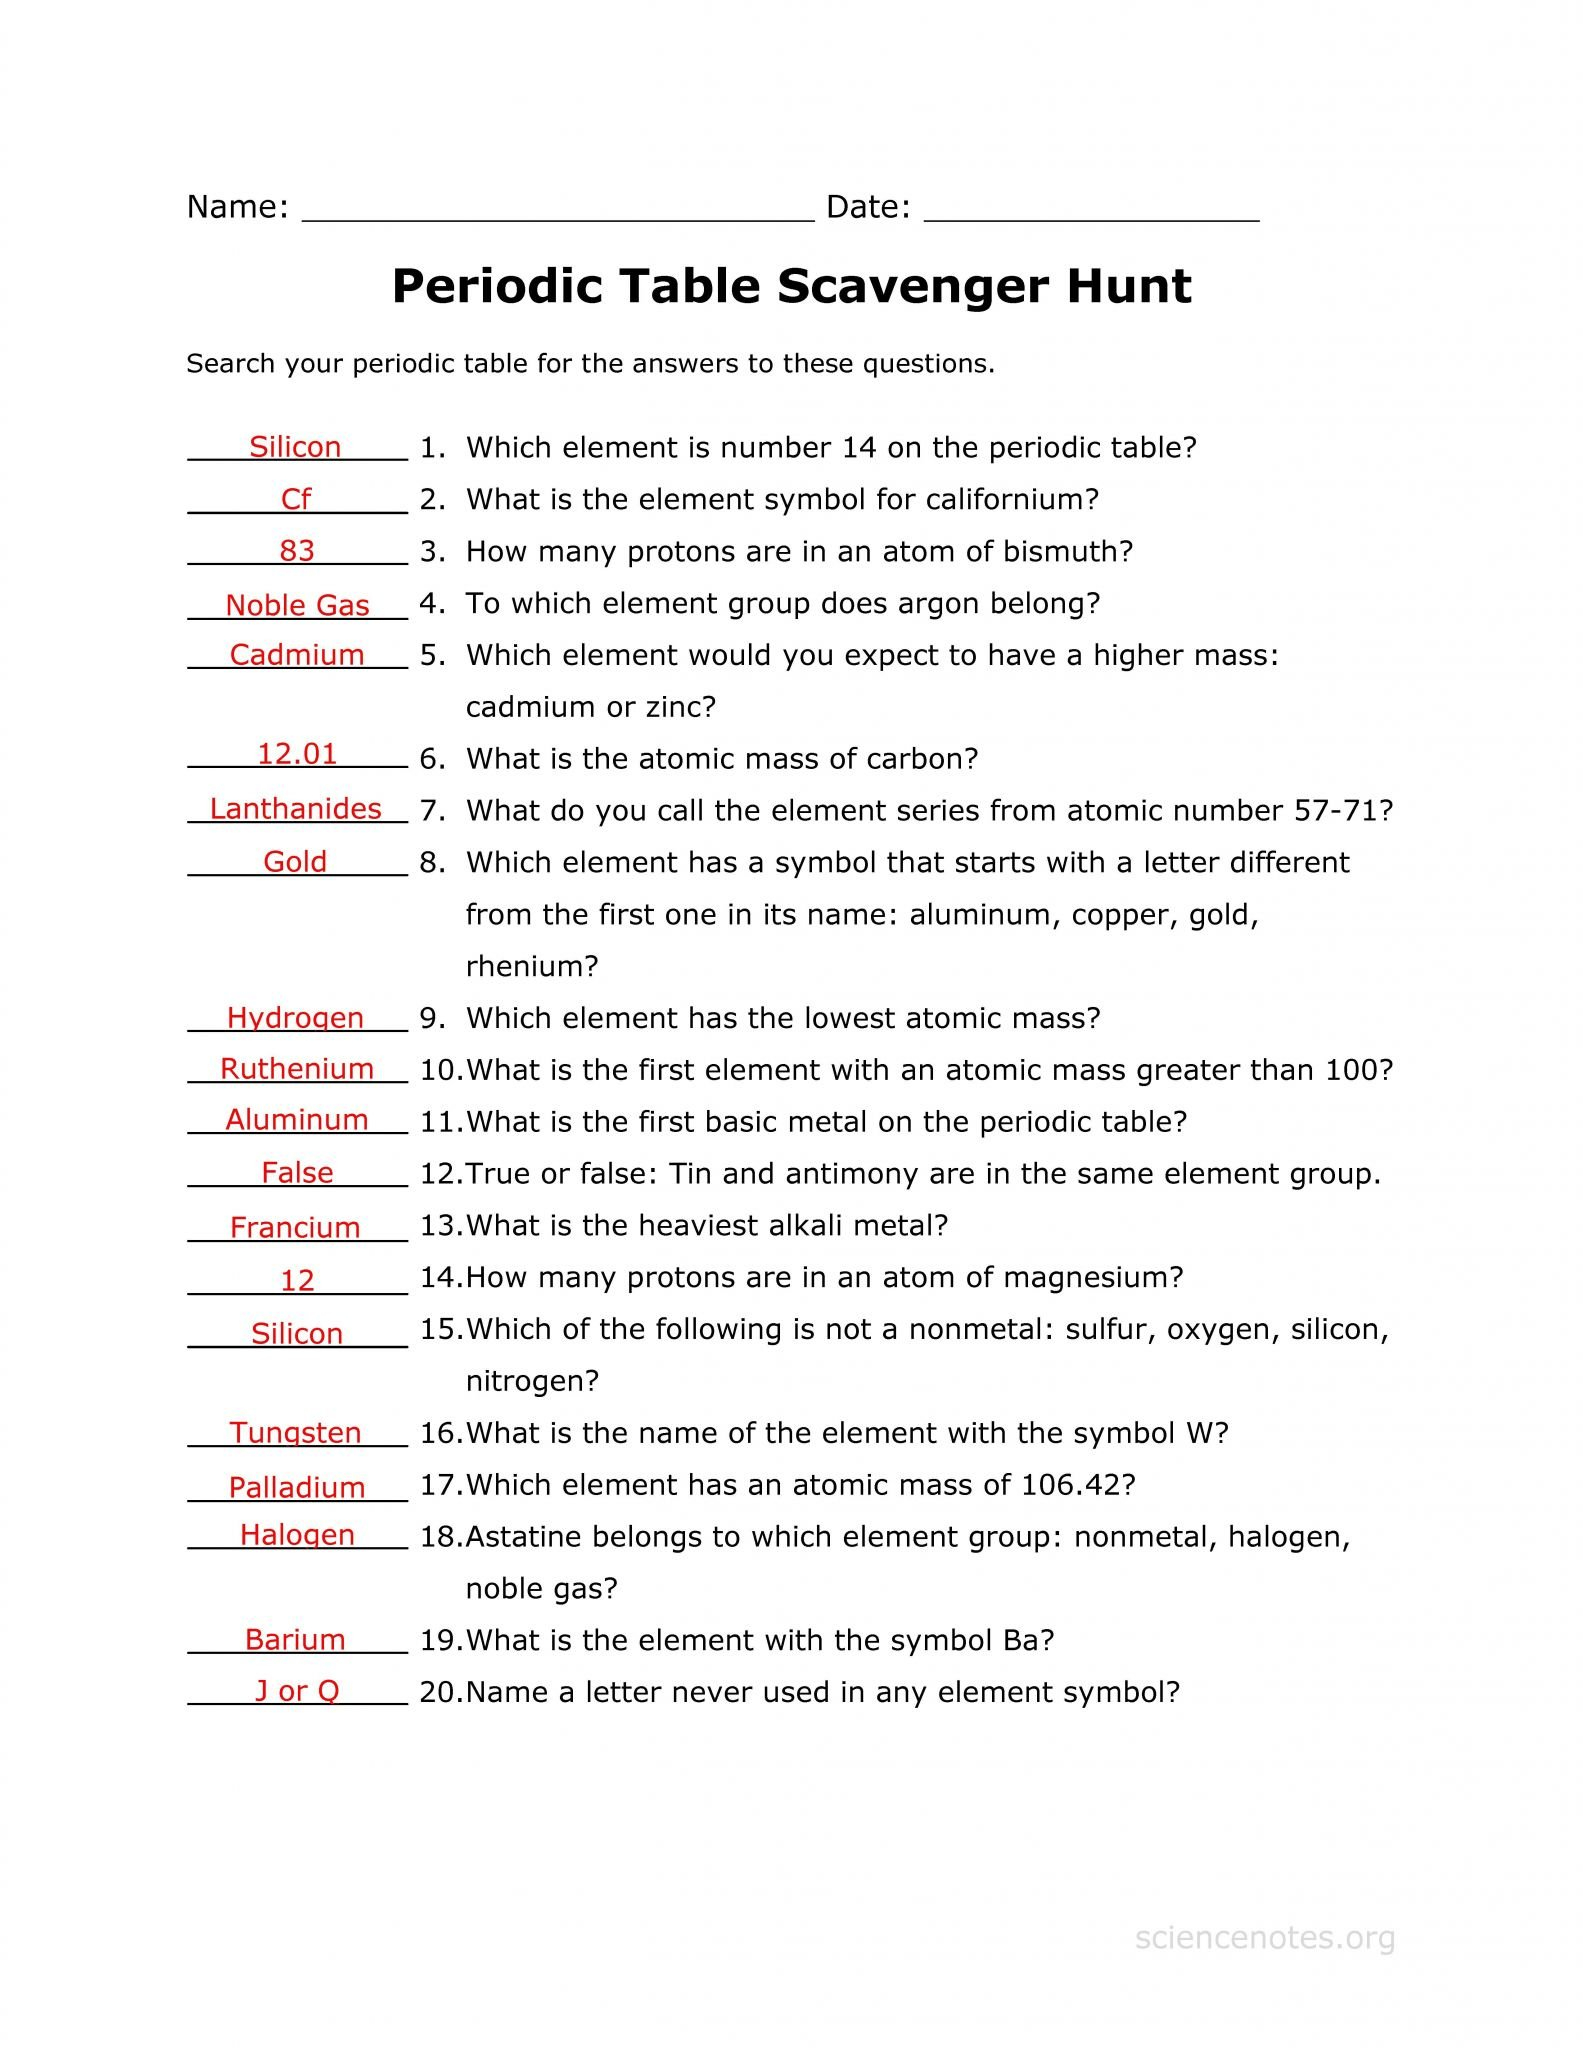 Constitution Scavenger Hunt Worksheet Answer Key  Briefencounters Together With Constitution Scavenger Hunt Worksheet Answer Key